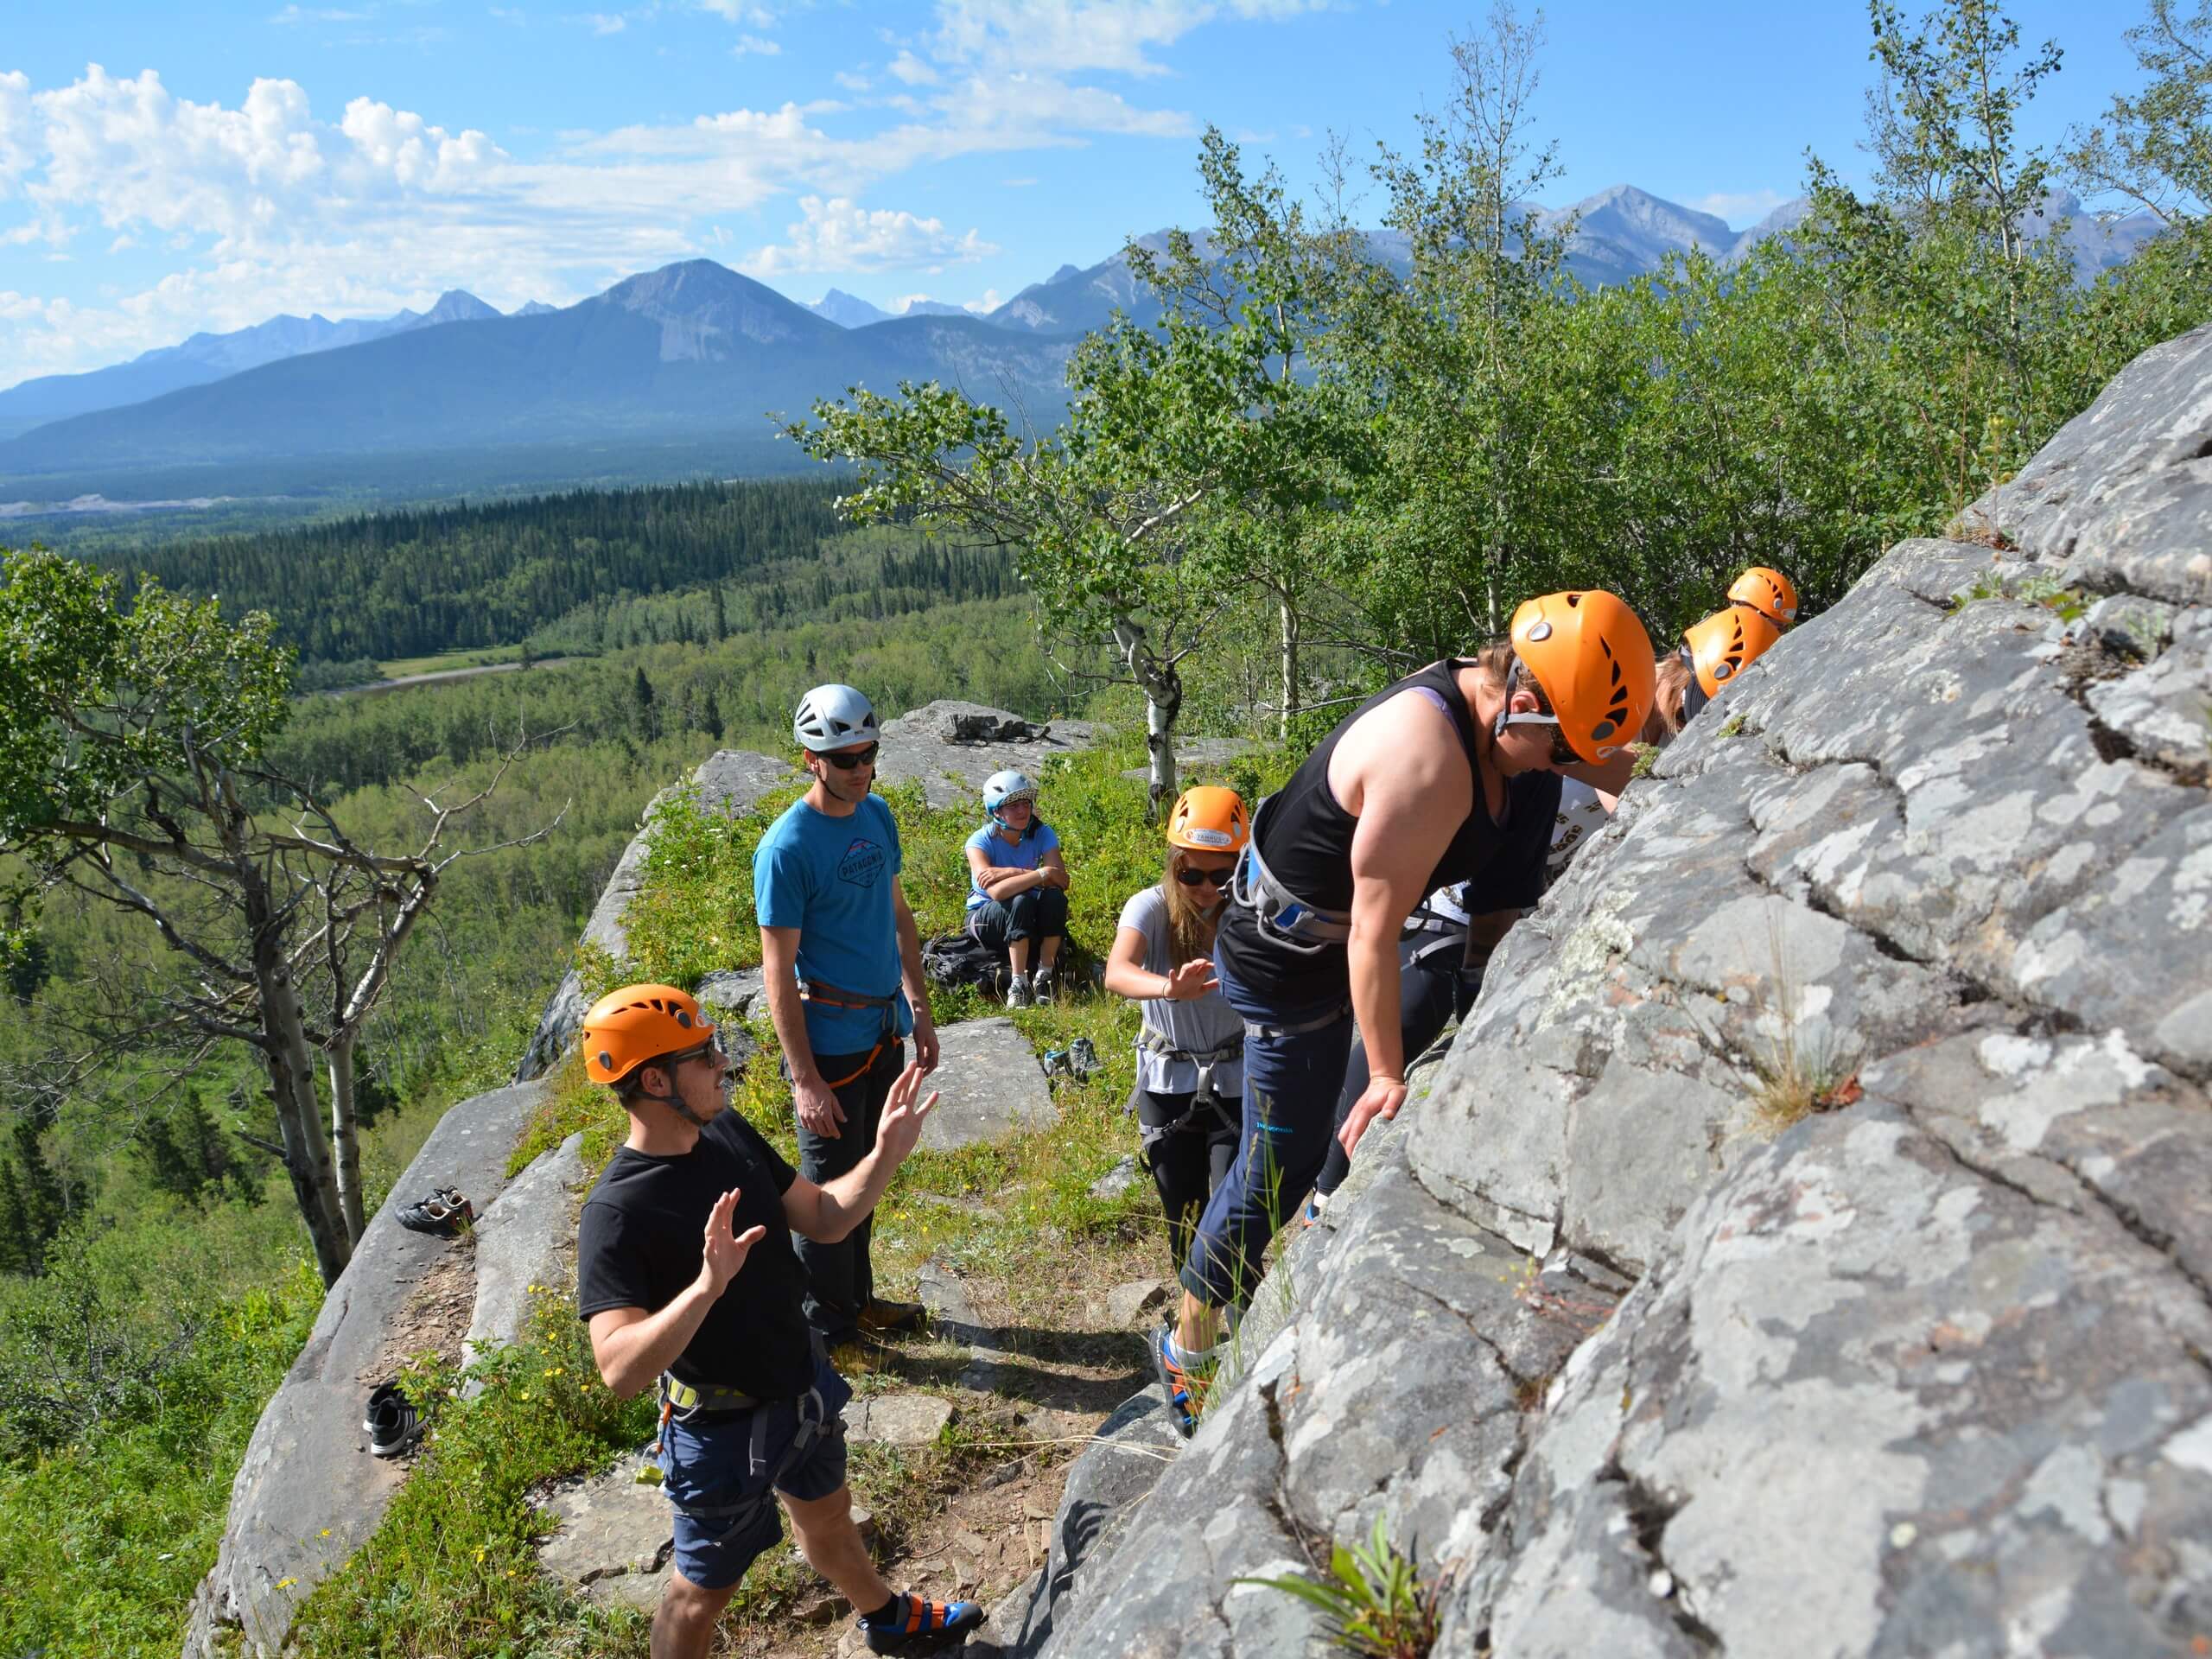 Learning to rock-climb in the Canadian Rockies